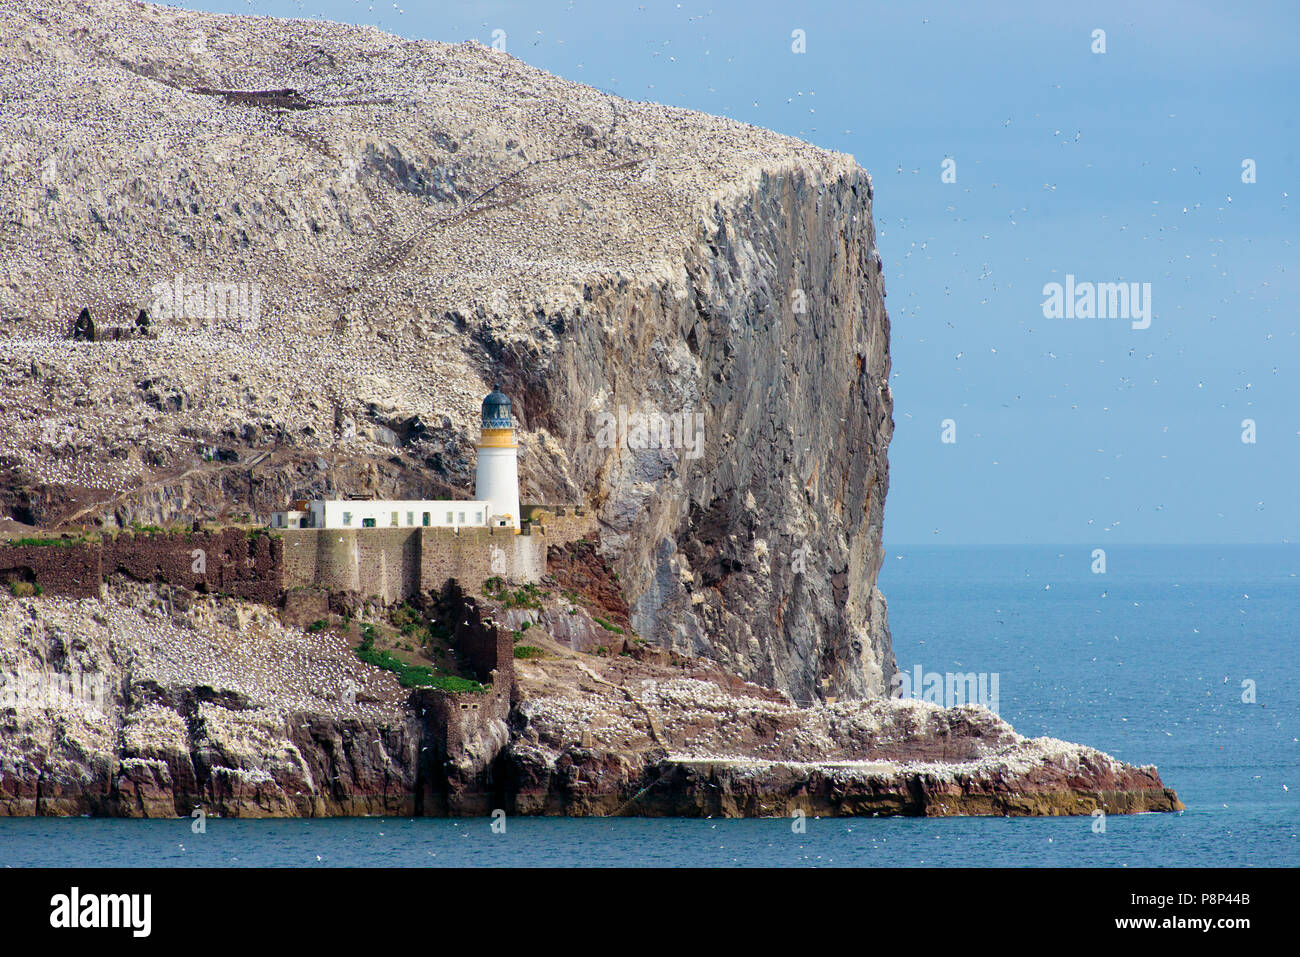 Gannet breeding colony on rock island the Bass rock in the North Sea. Europe Stock Photo